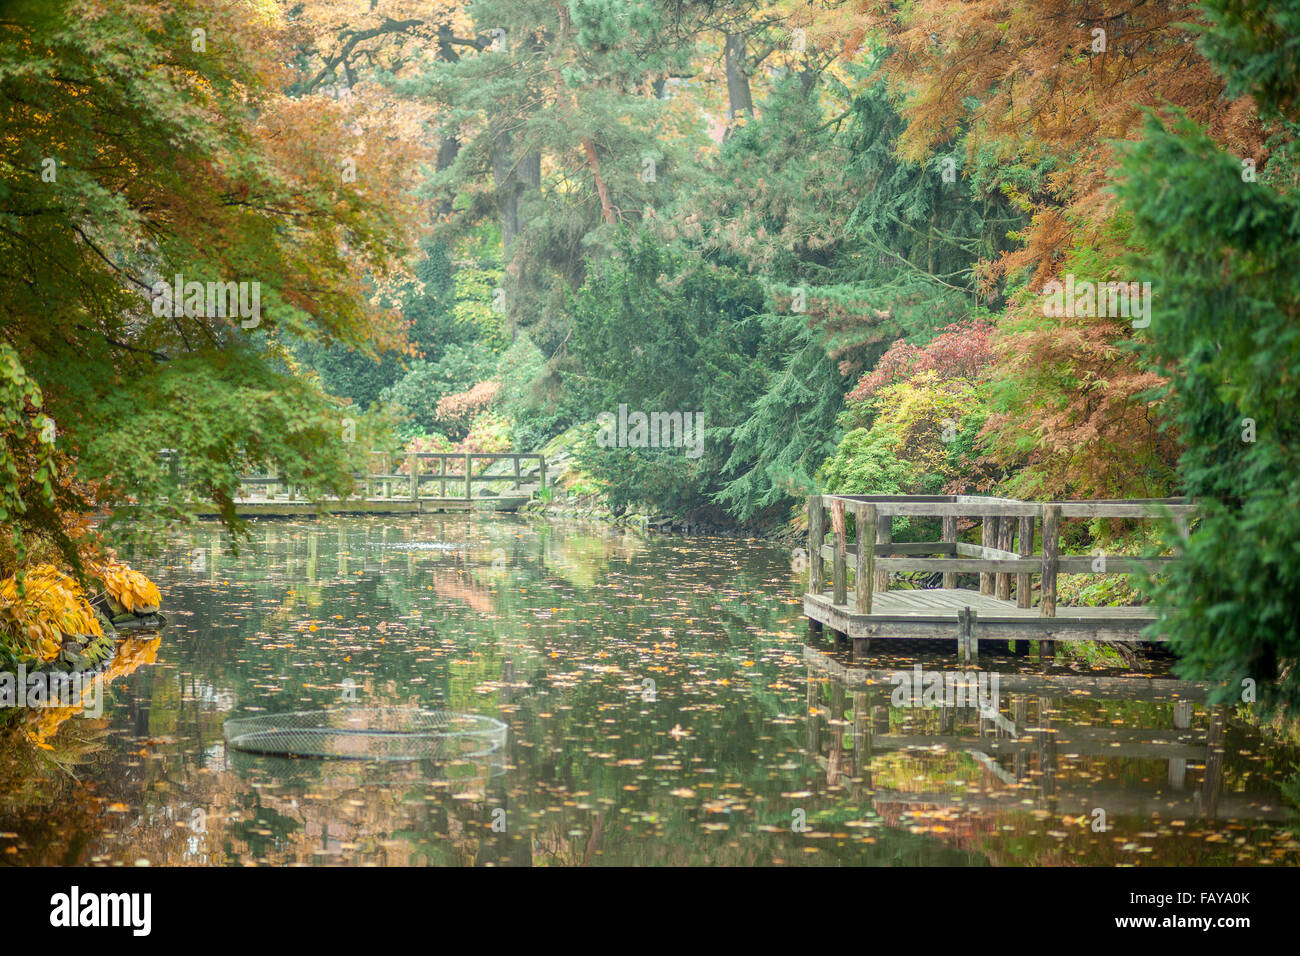 A tranquil pond surrounded by colorful autumn trees Stock Photo